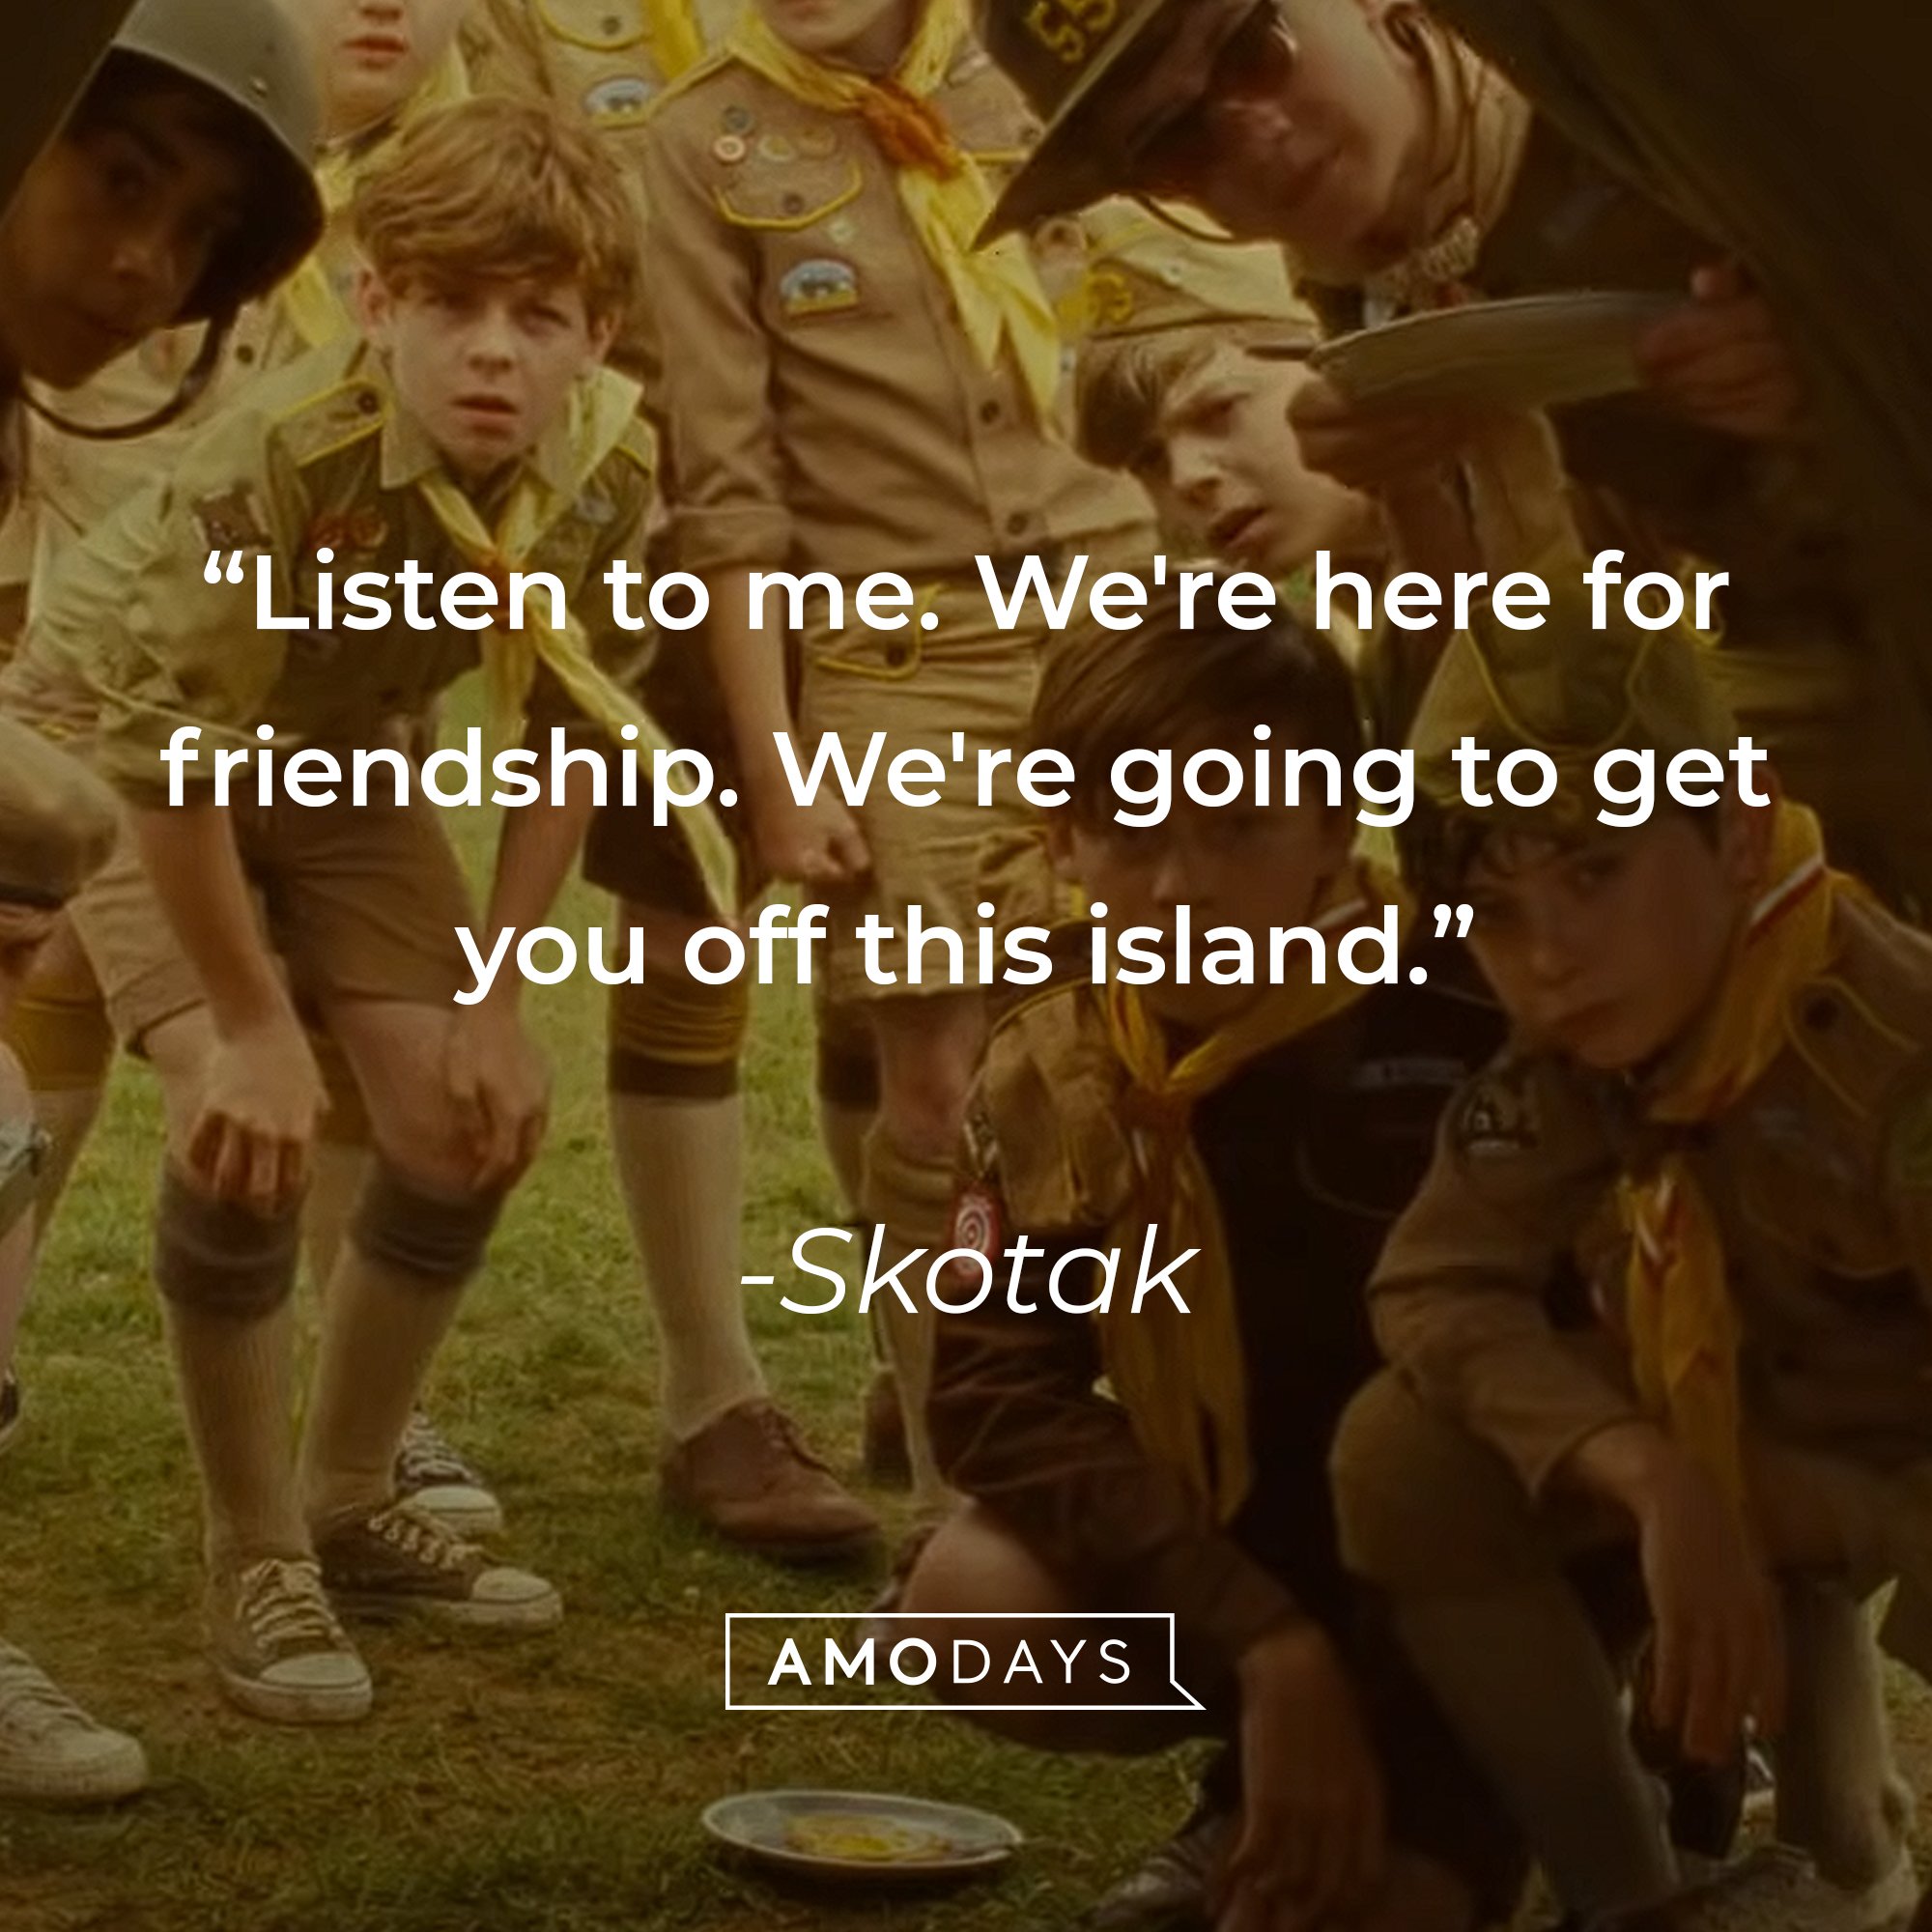 Skotak's quote: "Listen to me. We're here for friendship. We're going to get you off this island." | Image: AmoDays